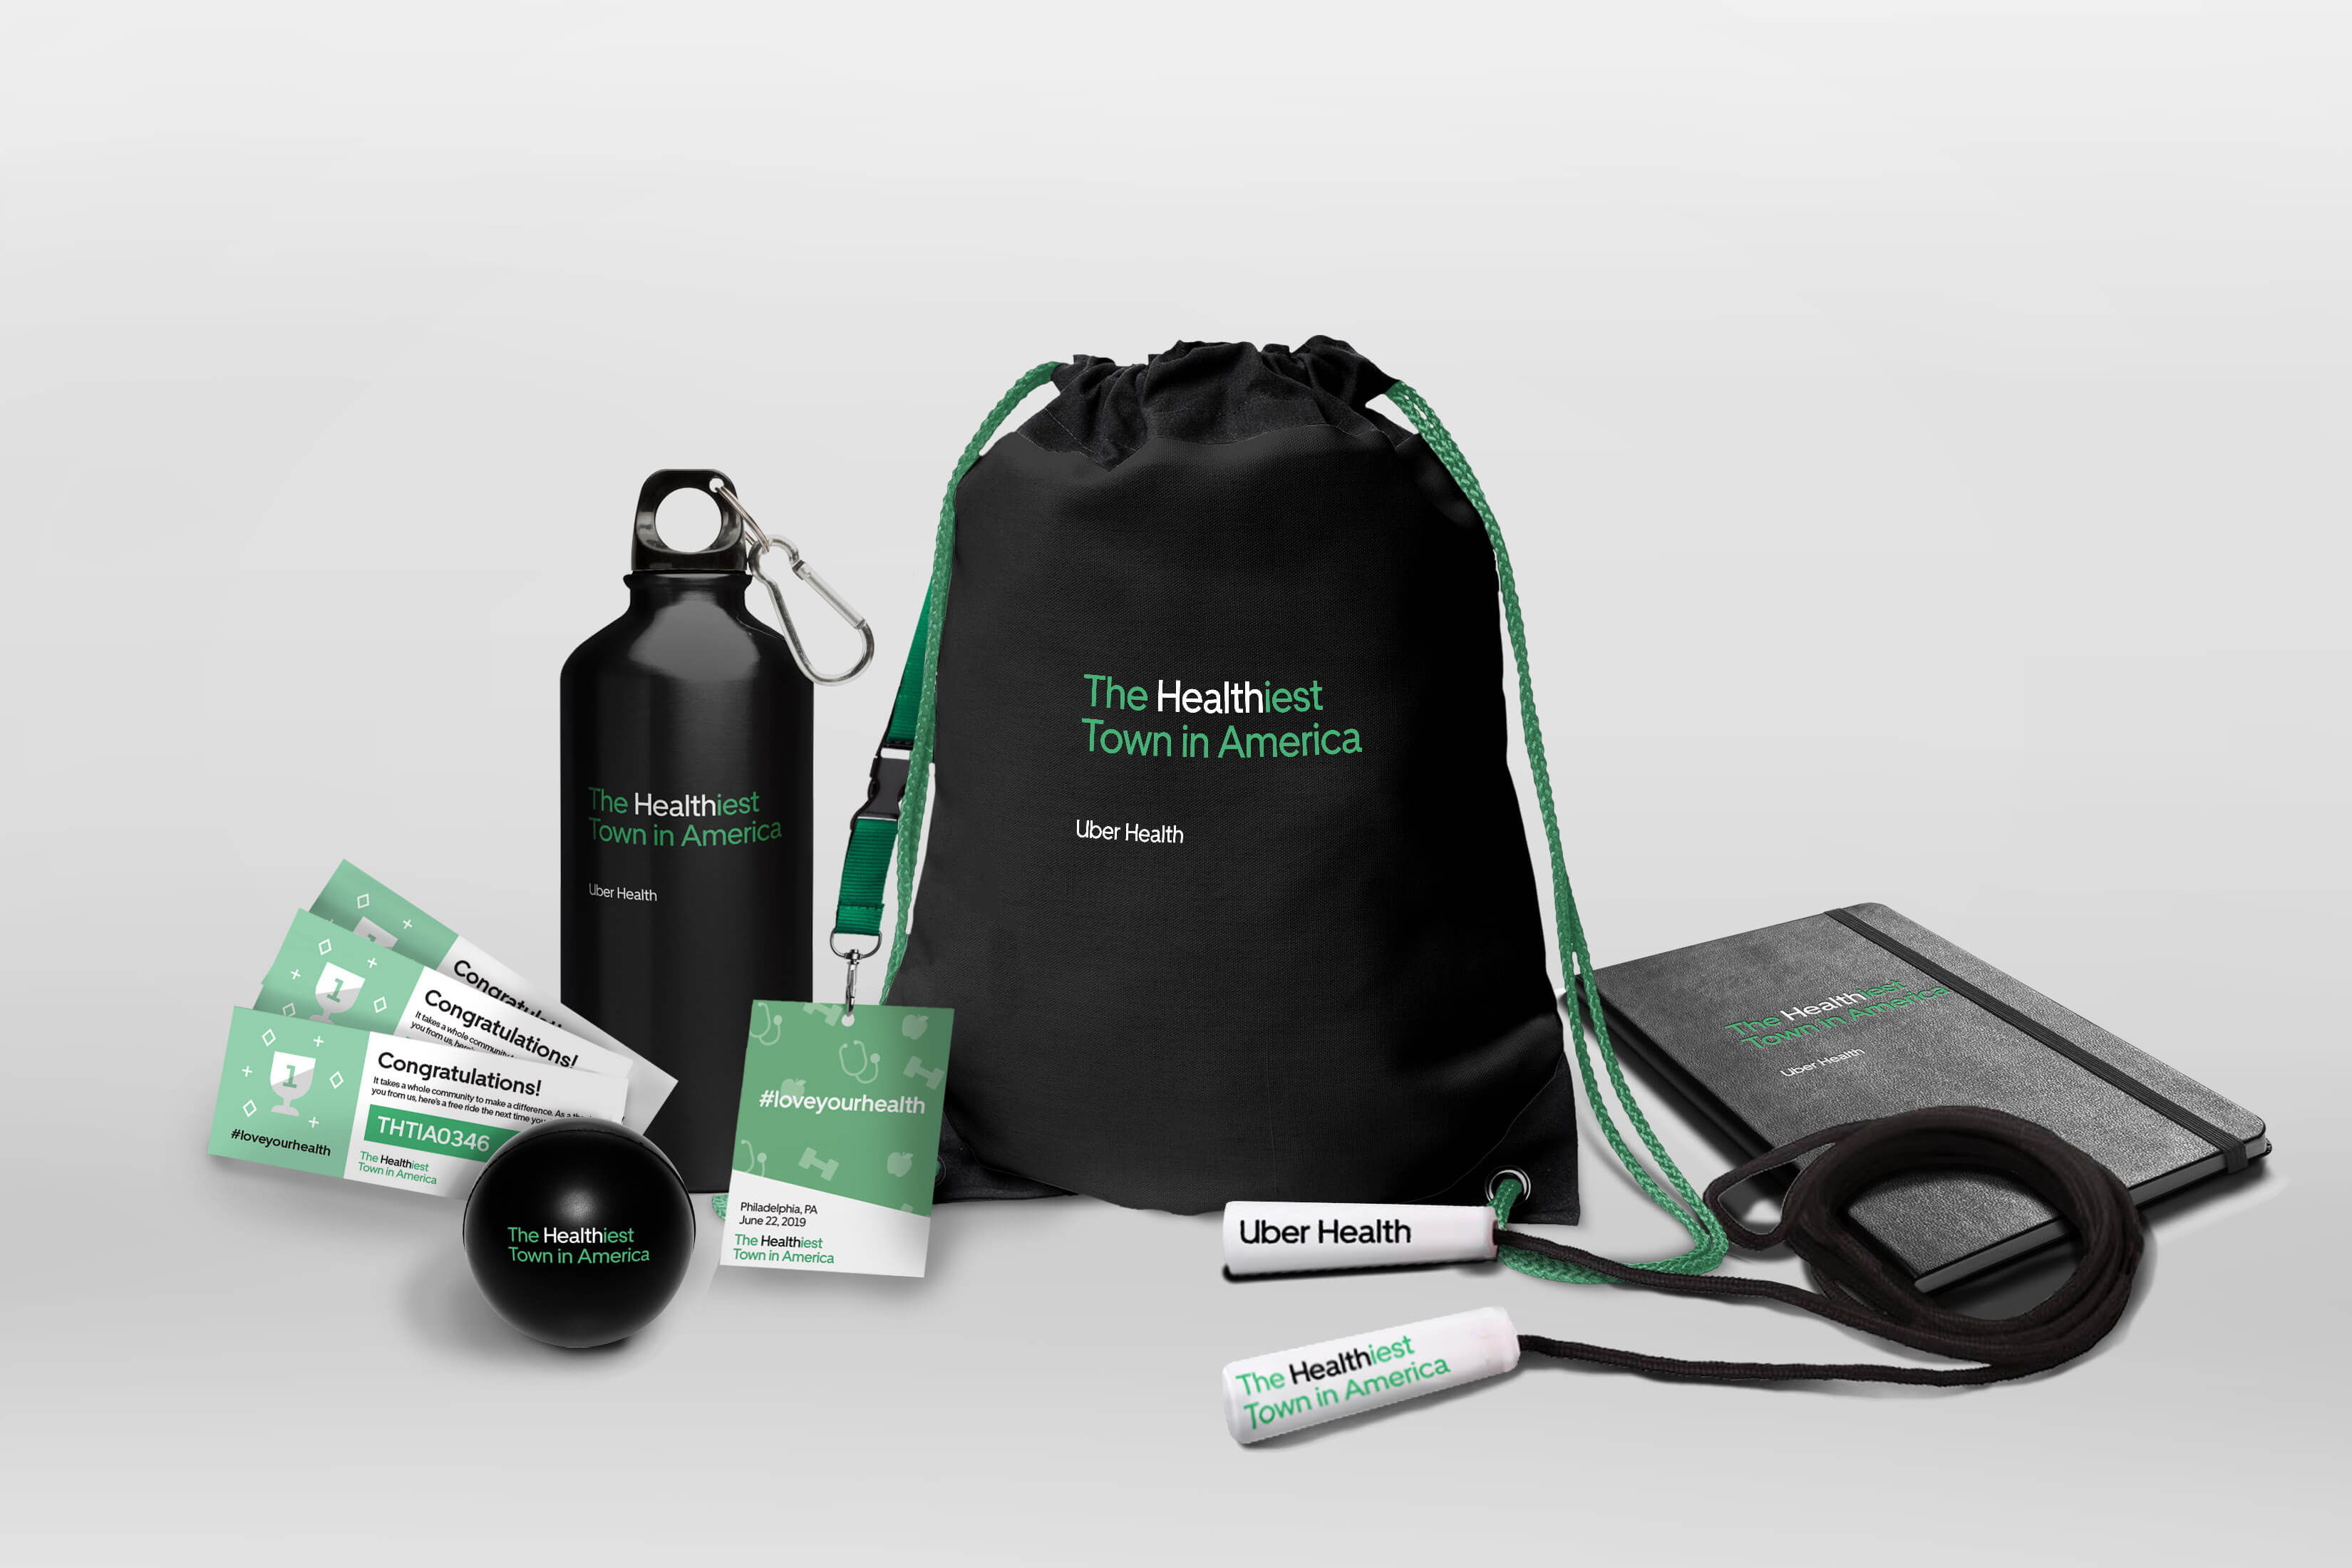 The completed Health Kit: items included are a water bottle, vouchers for free Uber rides, jump rope, a stress ball, and a booklet to record activities